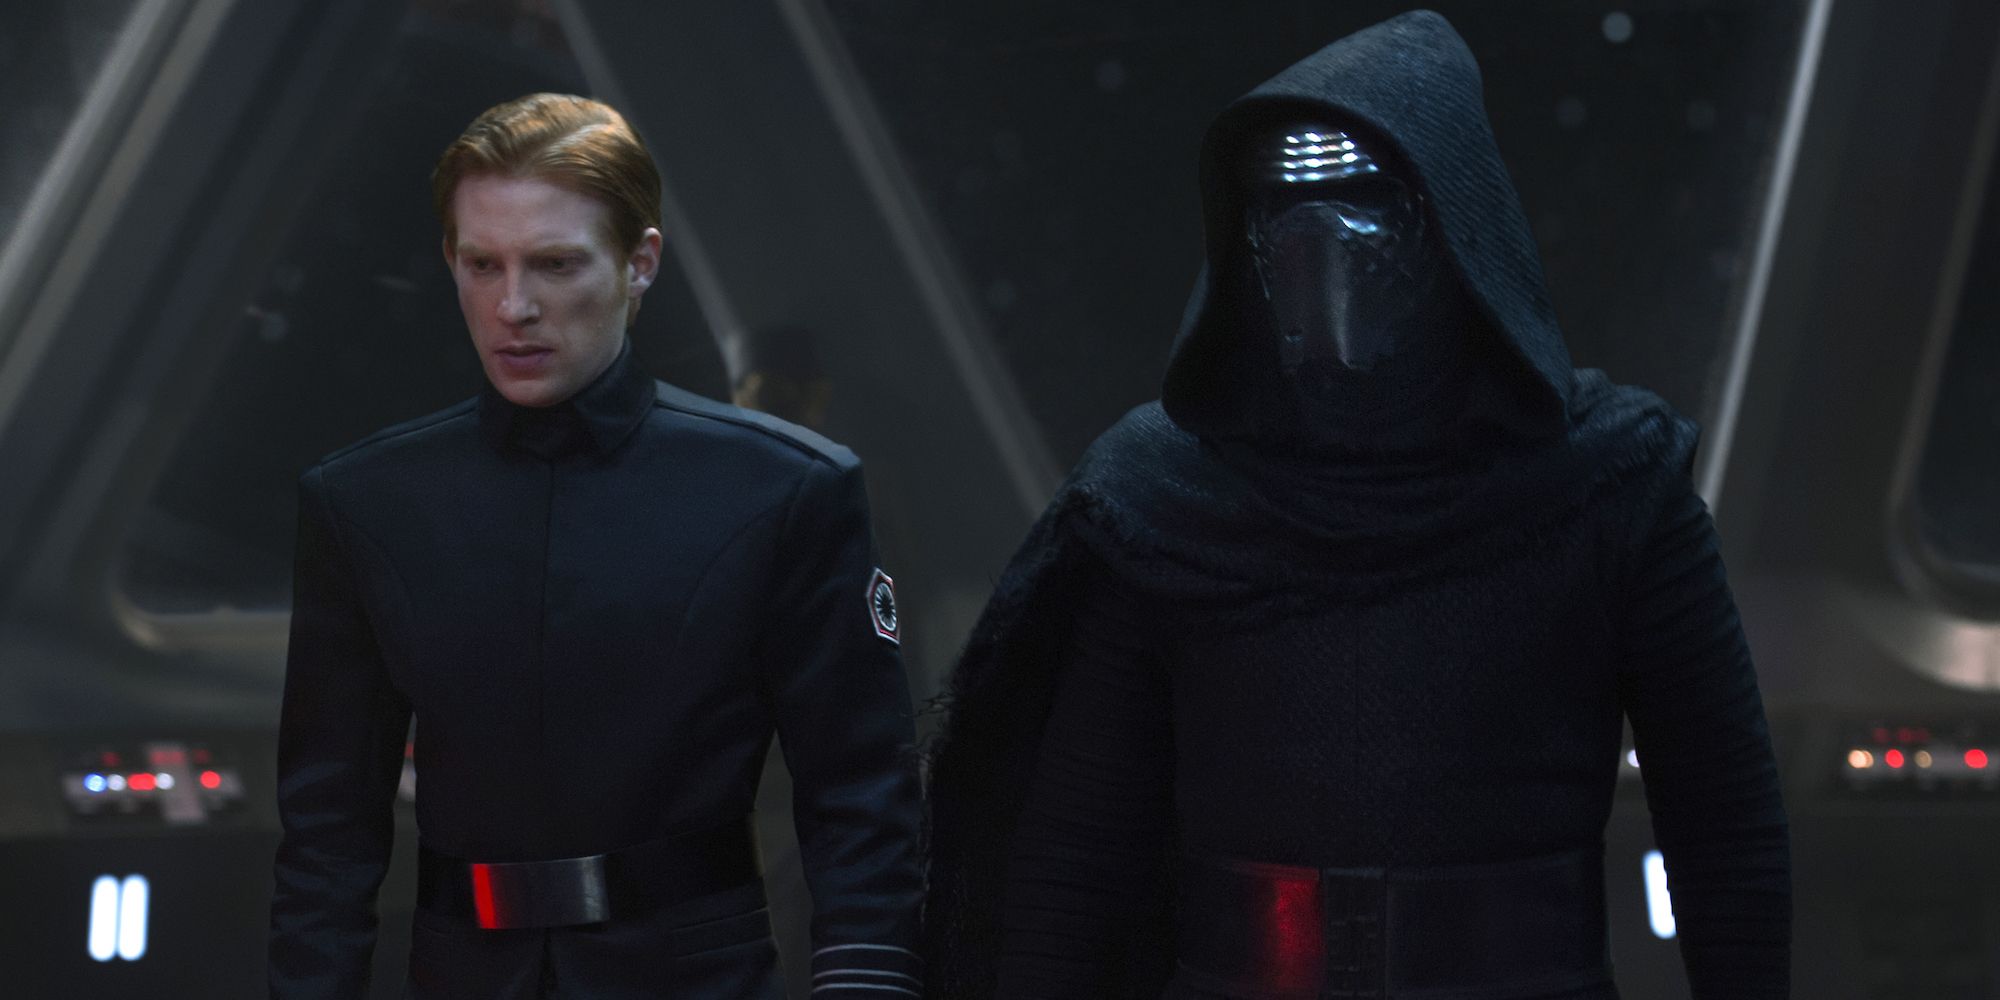 General Hux and Kylo Ren stand side by side in Star Wars: The Force Awakens.